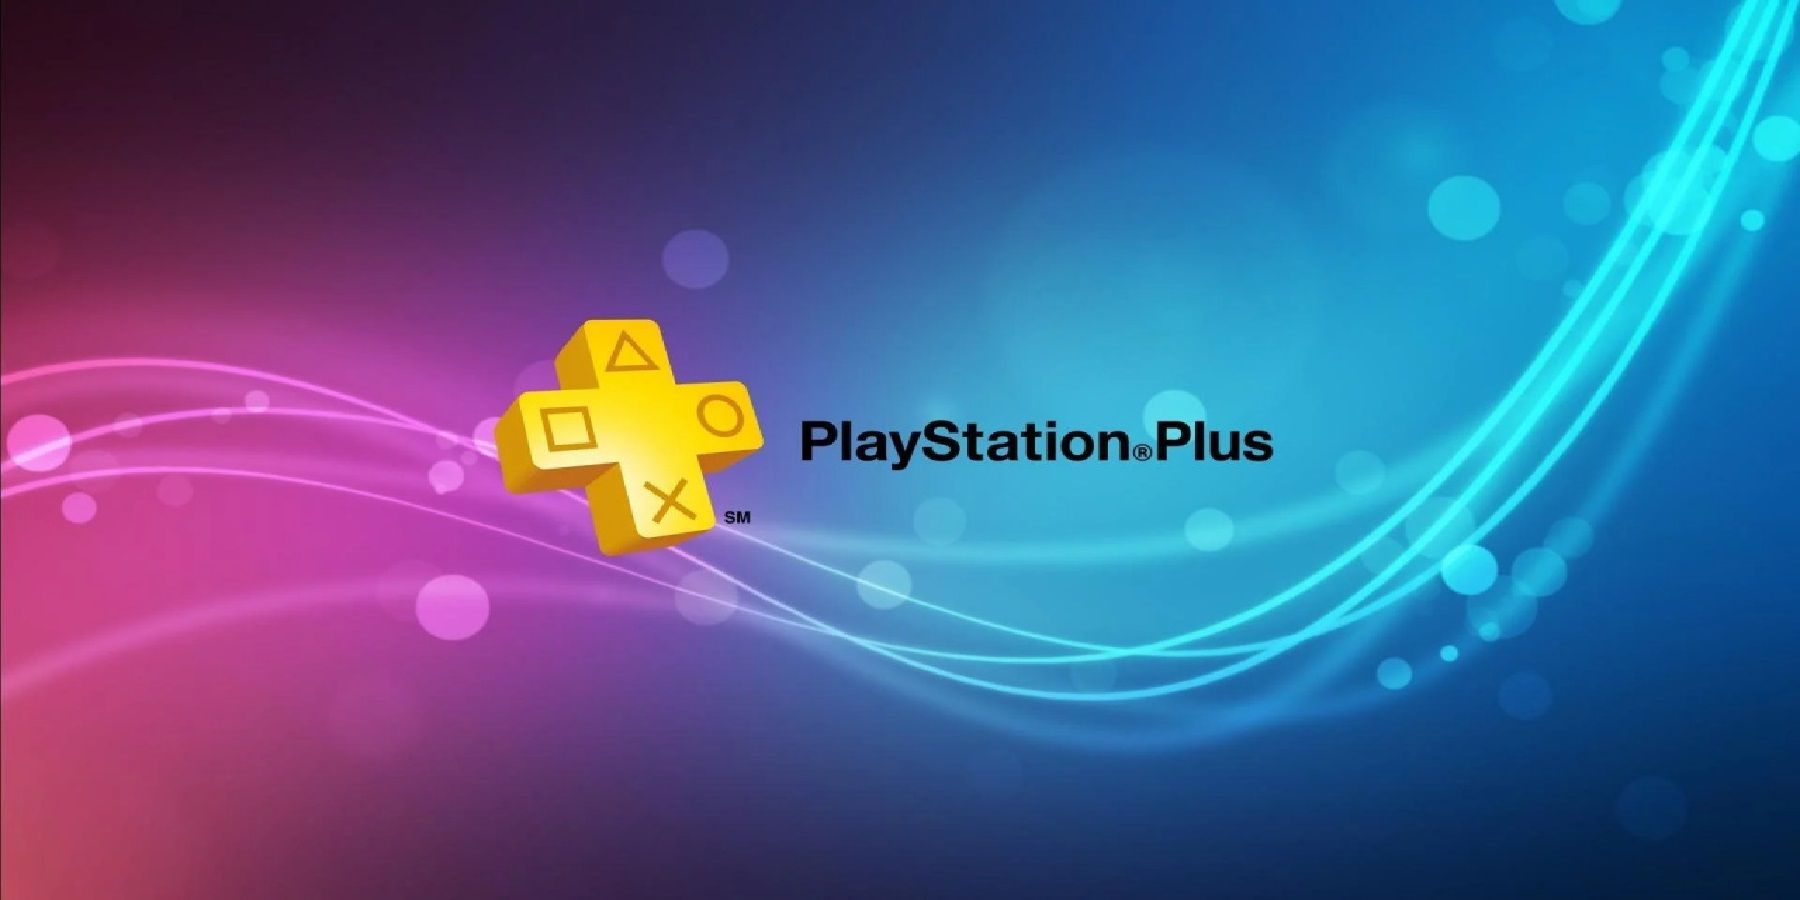 PlayStation Plus Extra And Premium Games For November Are Here - GameSpot